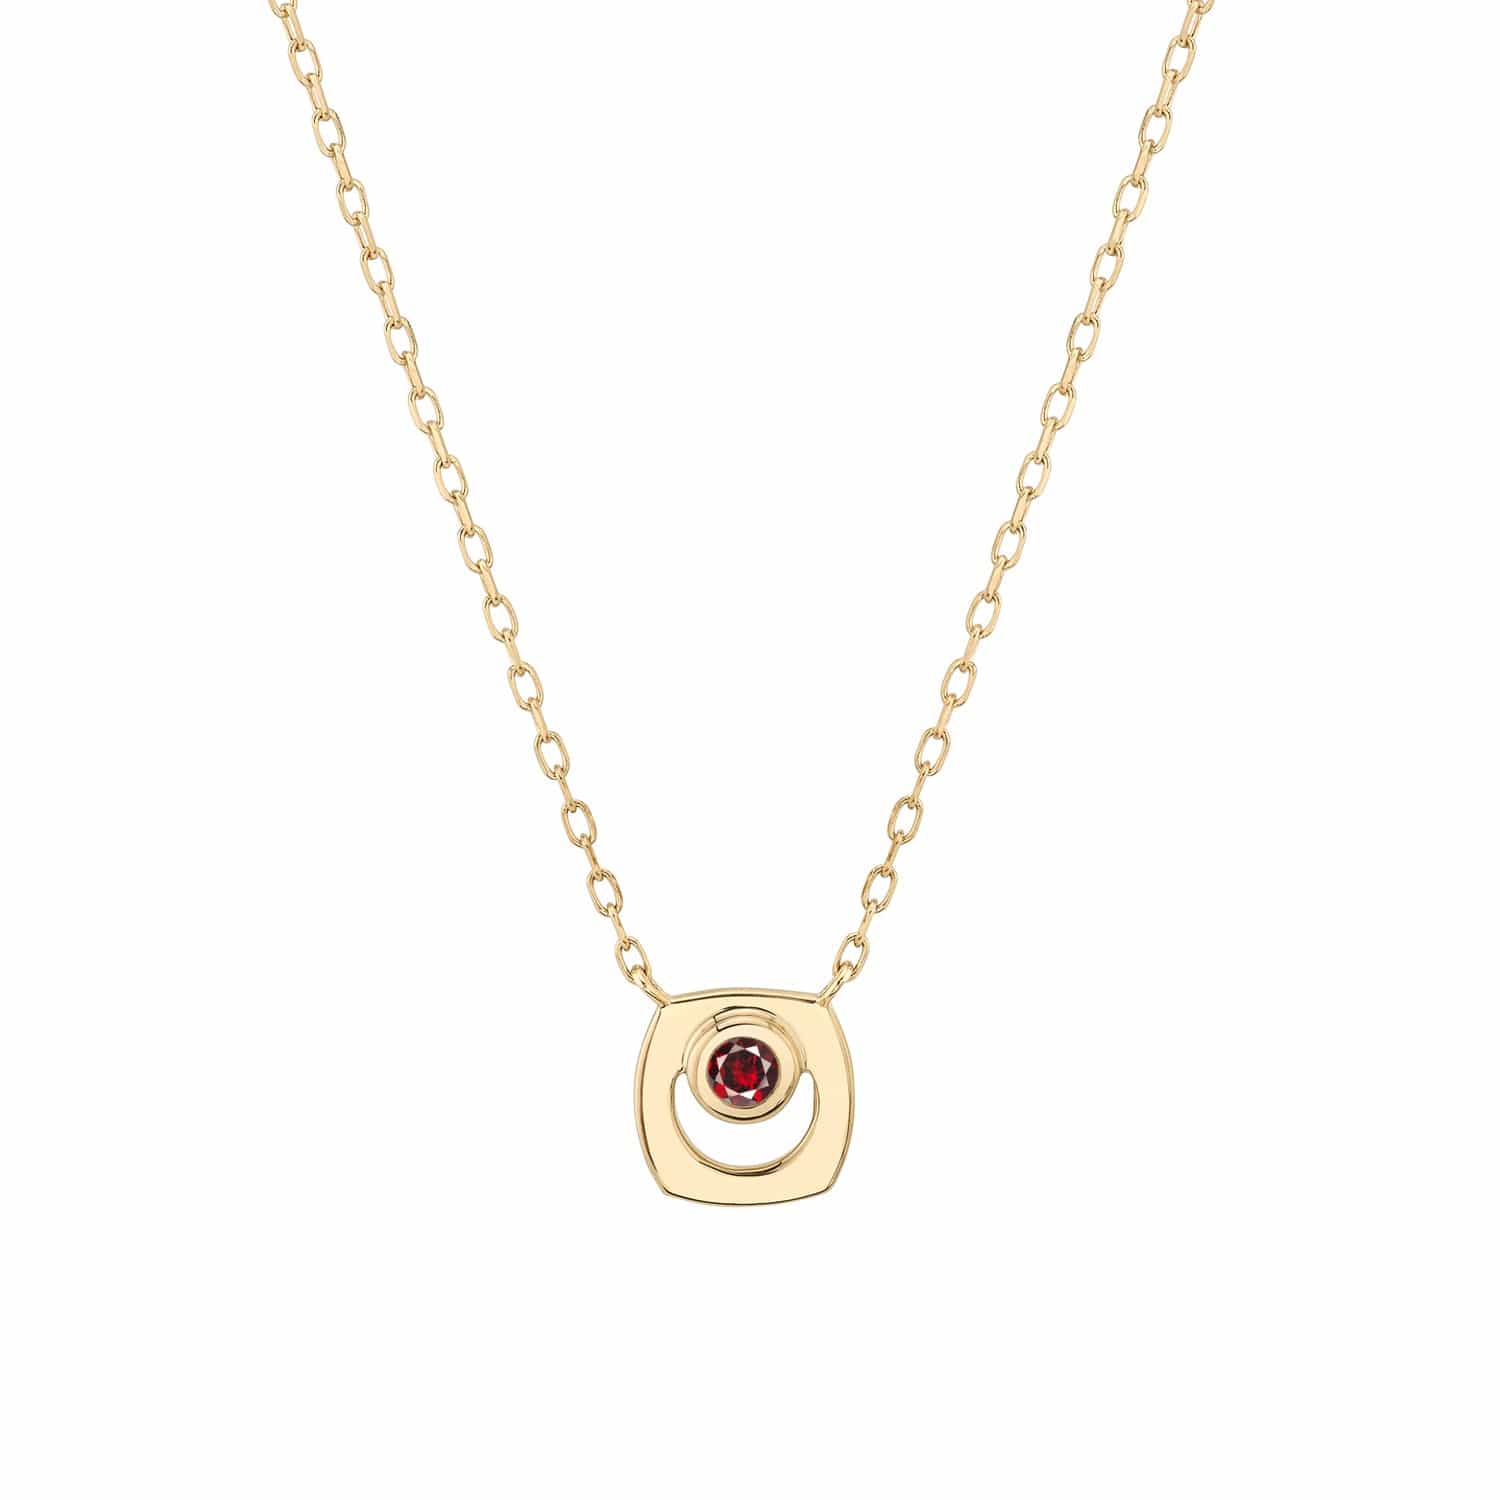 MICHAEL M Necklaces 14K Yellow Gold / Garnet - January Signature Birthstone Necklace CN435GT